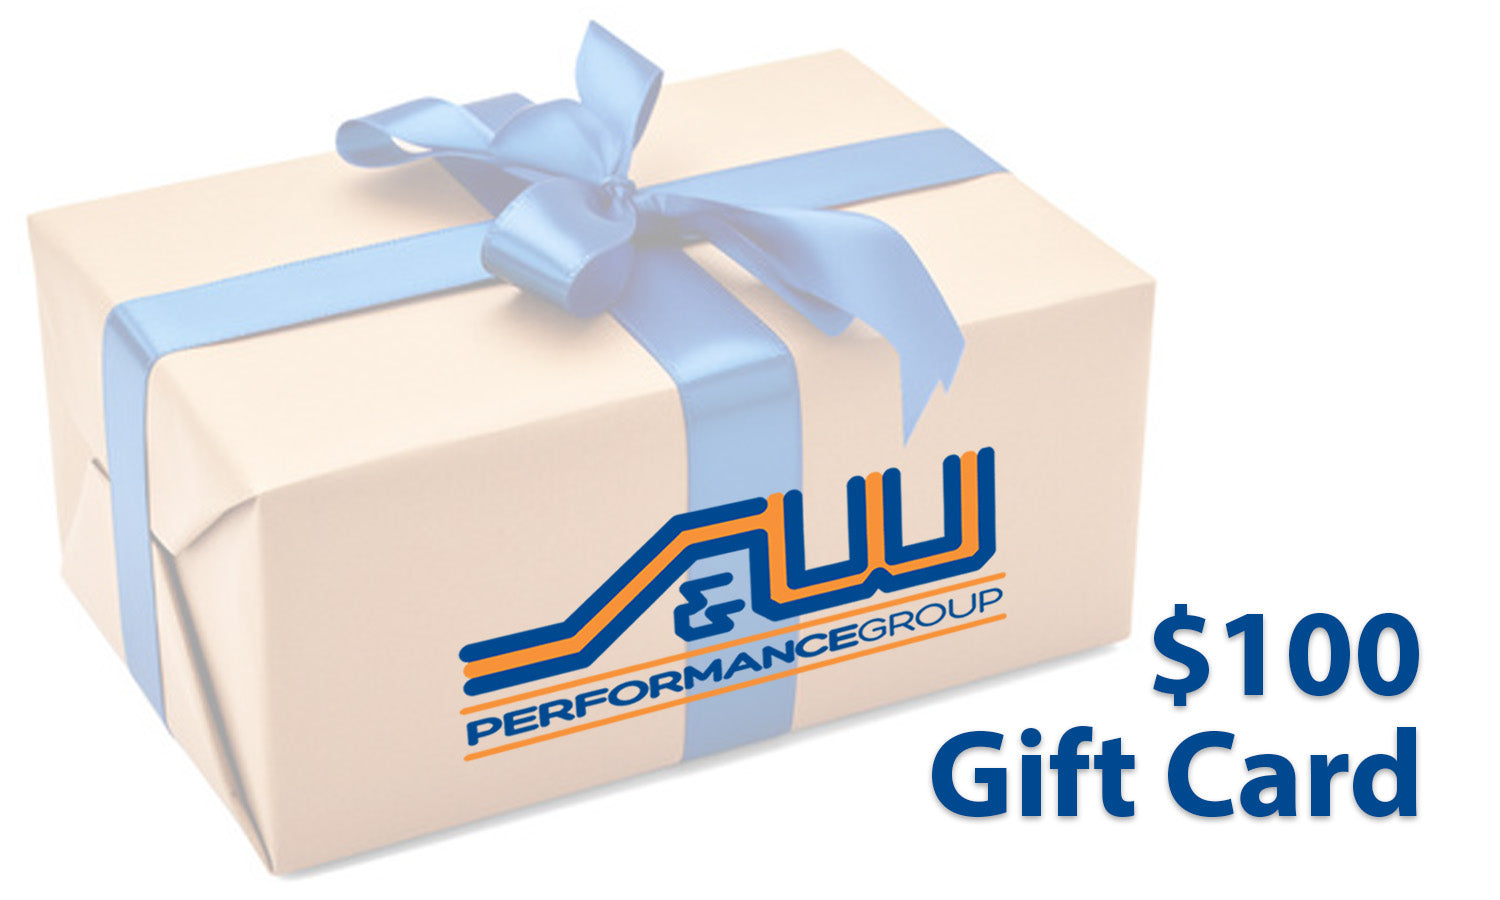 S&W Performance Group $100 Gift Card